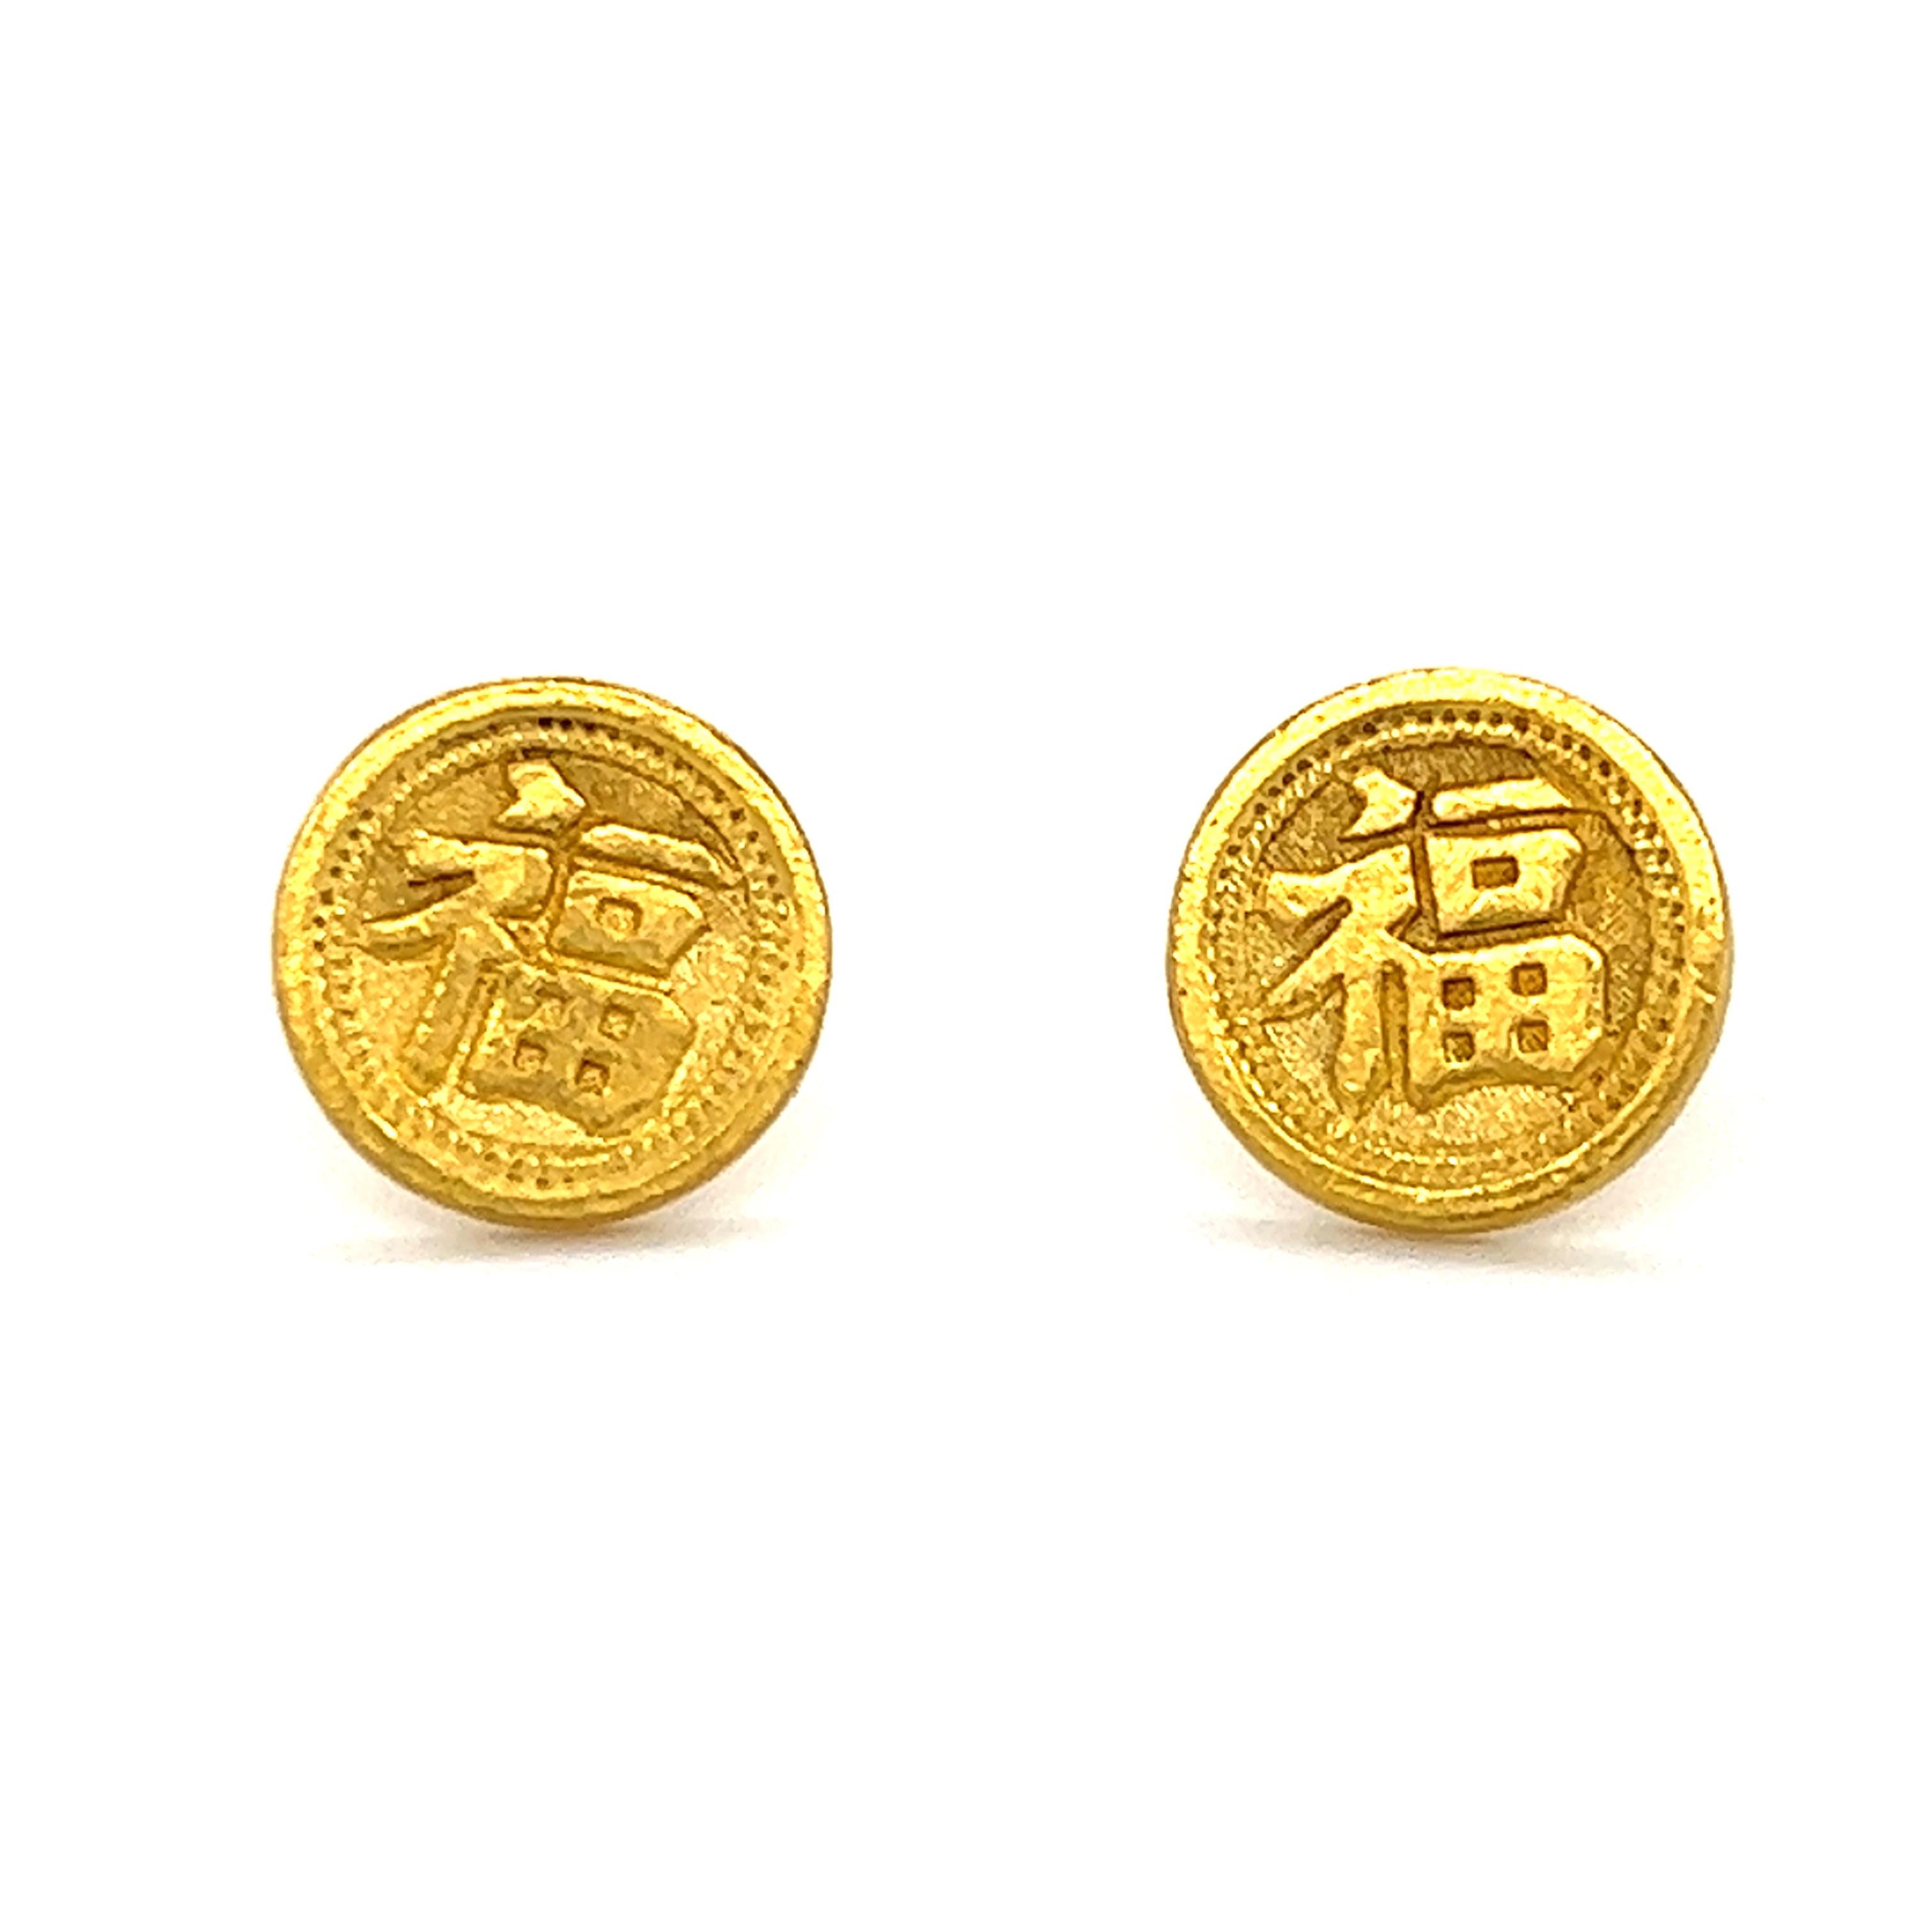 One pair of 24 karat yellow gold Chinese characters earrings measuring 12.92mm in diameter and weighing 5.7 grams.  The earrings are complete with 14-karat yellow friction posts and backs.  Converted into earrings from cufflinks.  